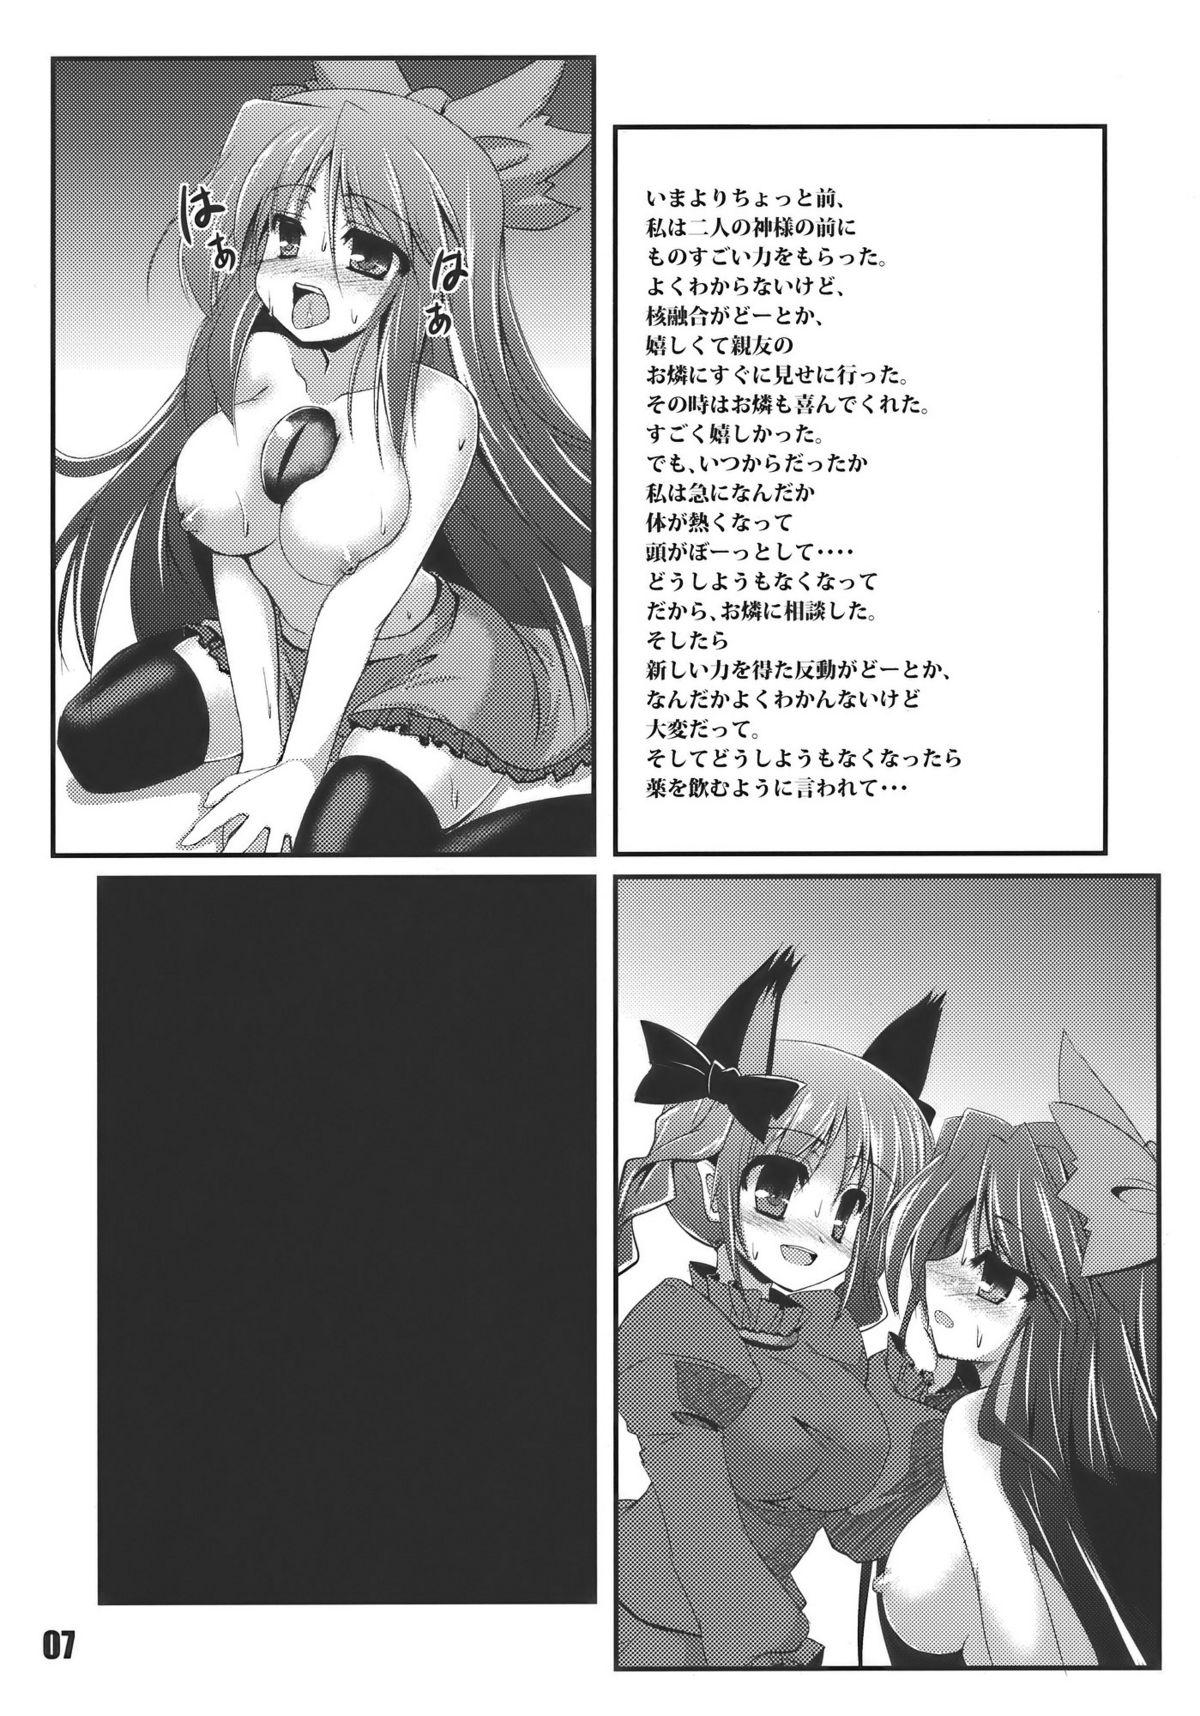 Butt Febrile Disease - Touhou project Amature - Page 7